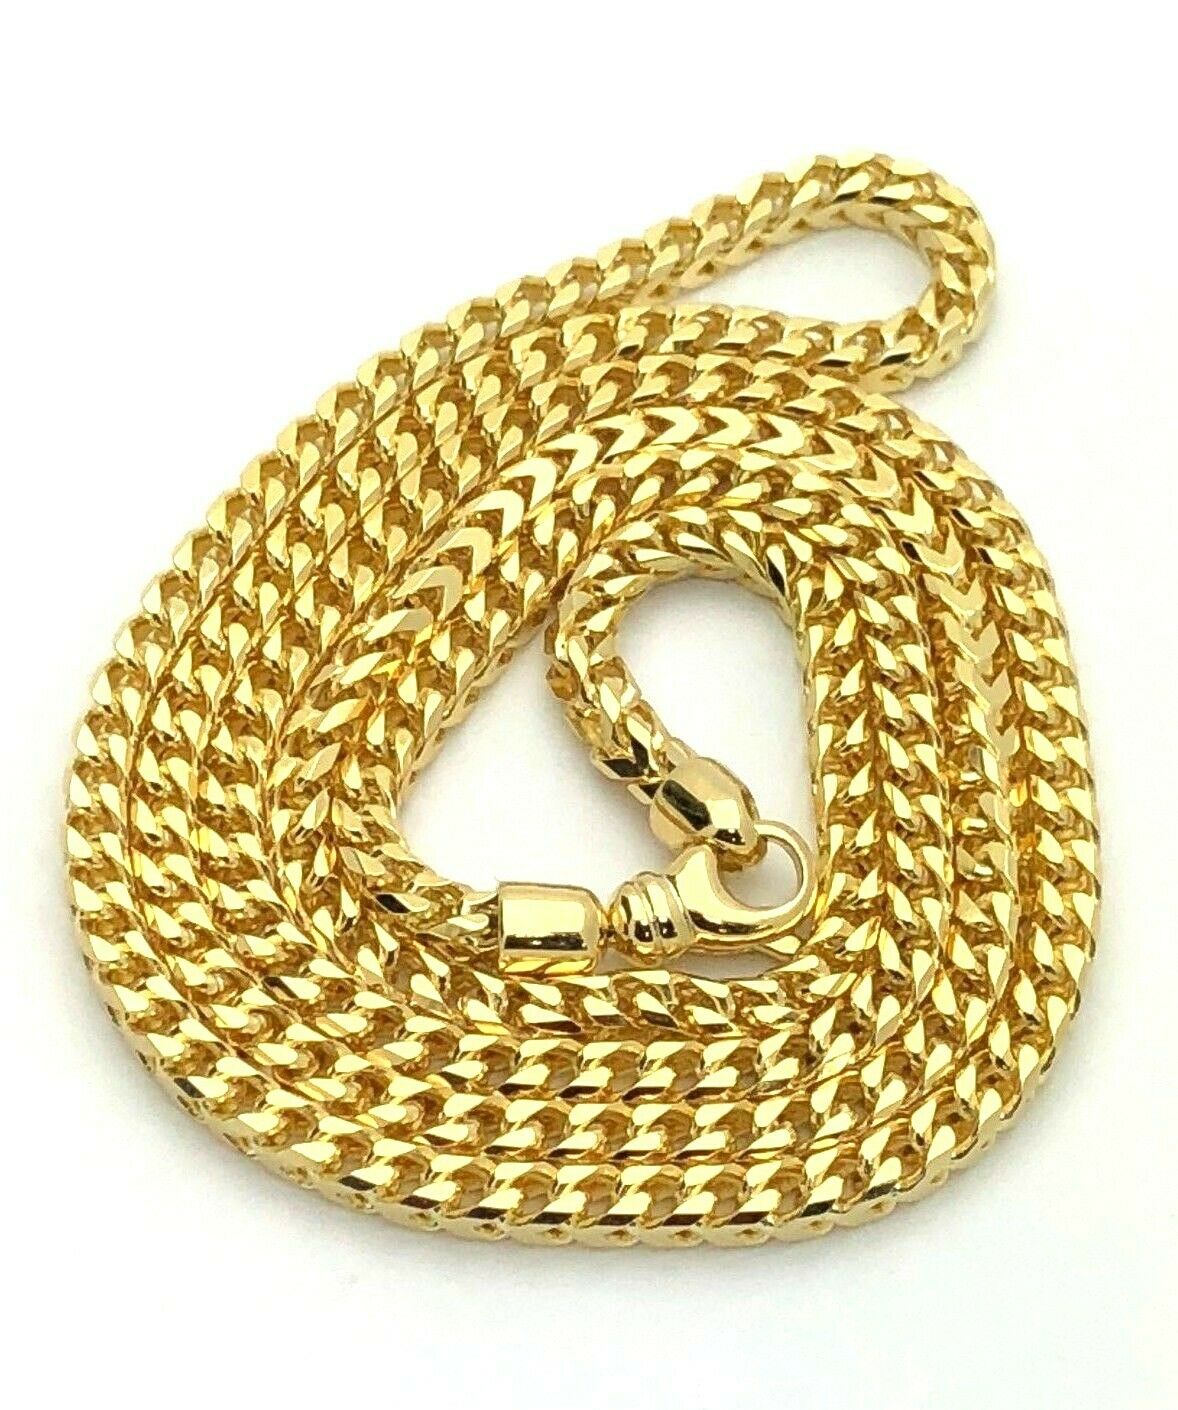 14k Yellow Gold Solid Franco Necklace Chain Link 24